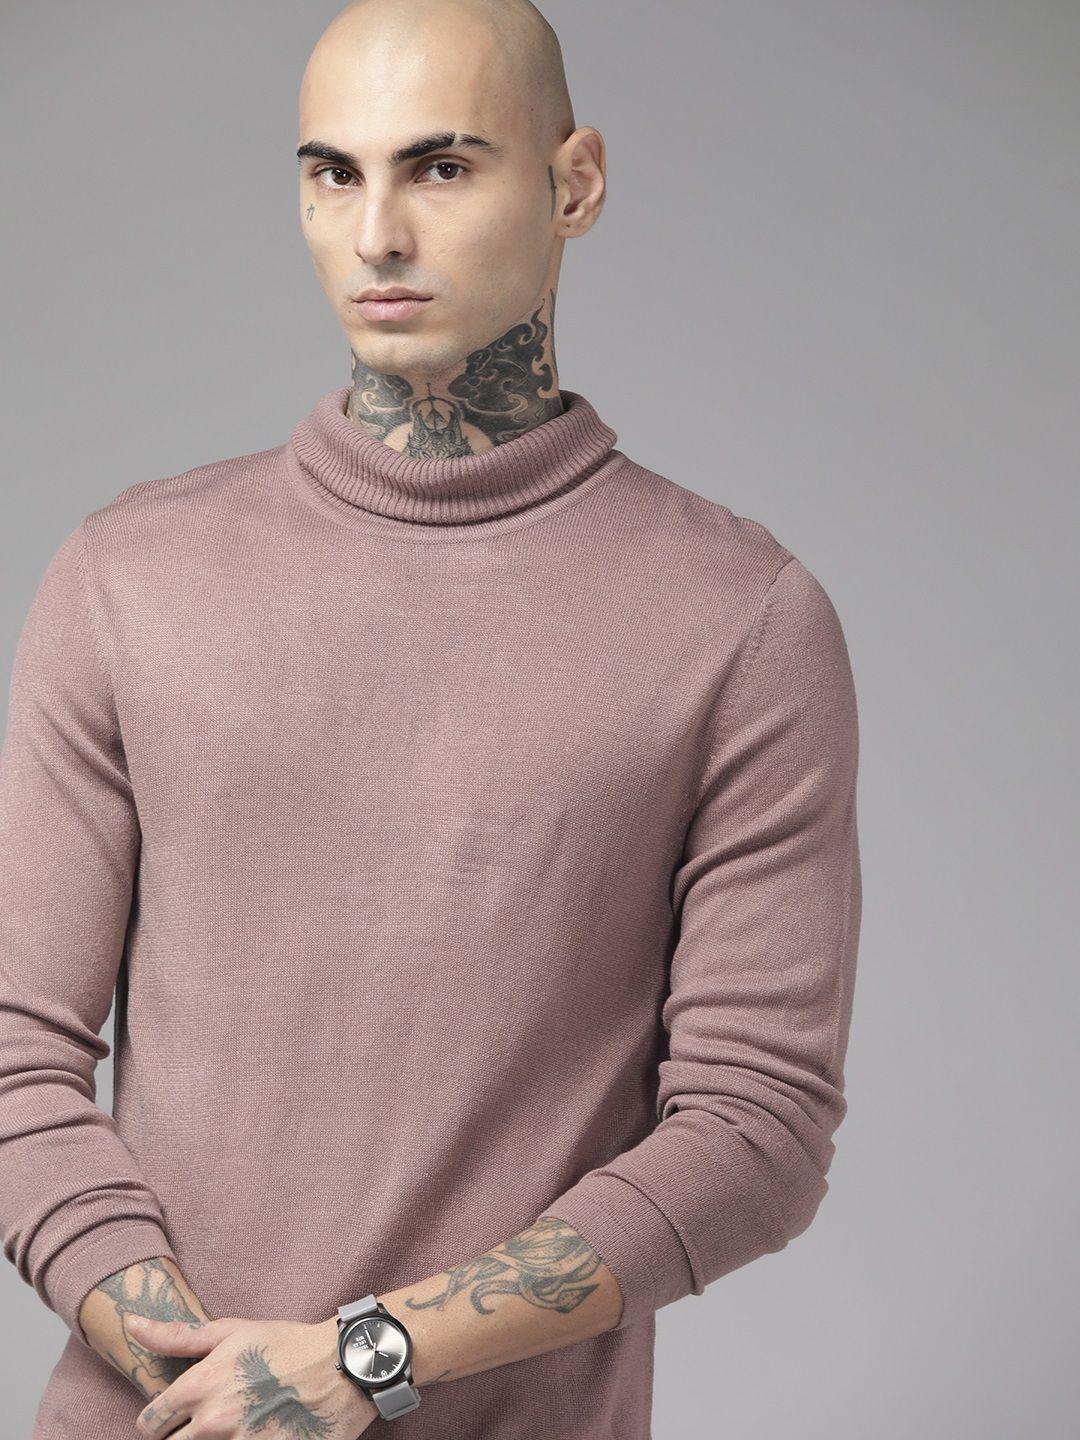 the roadster lifestyle co. men mauve solid acrylic turtle neck pullover